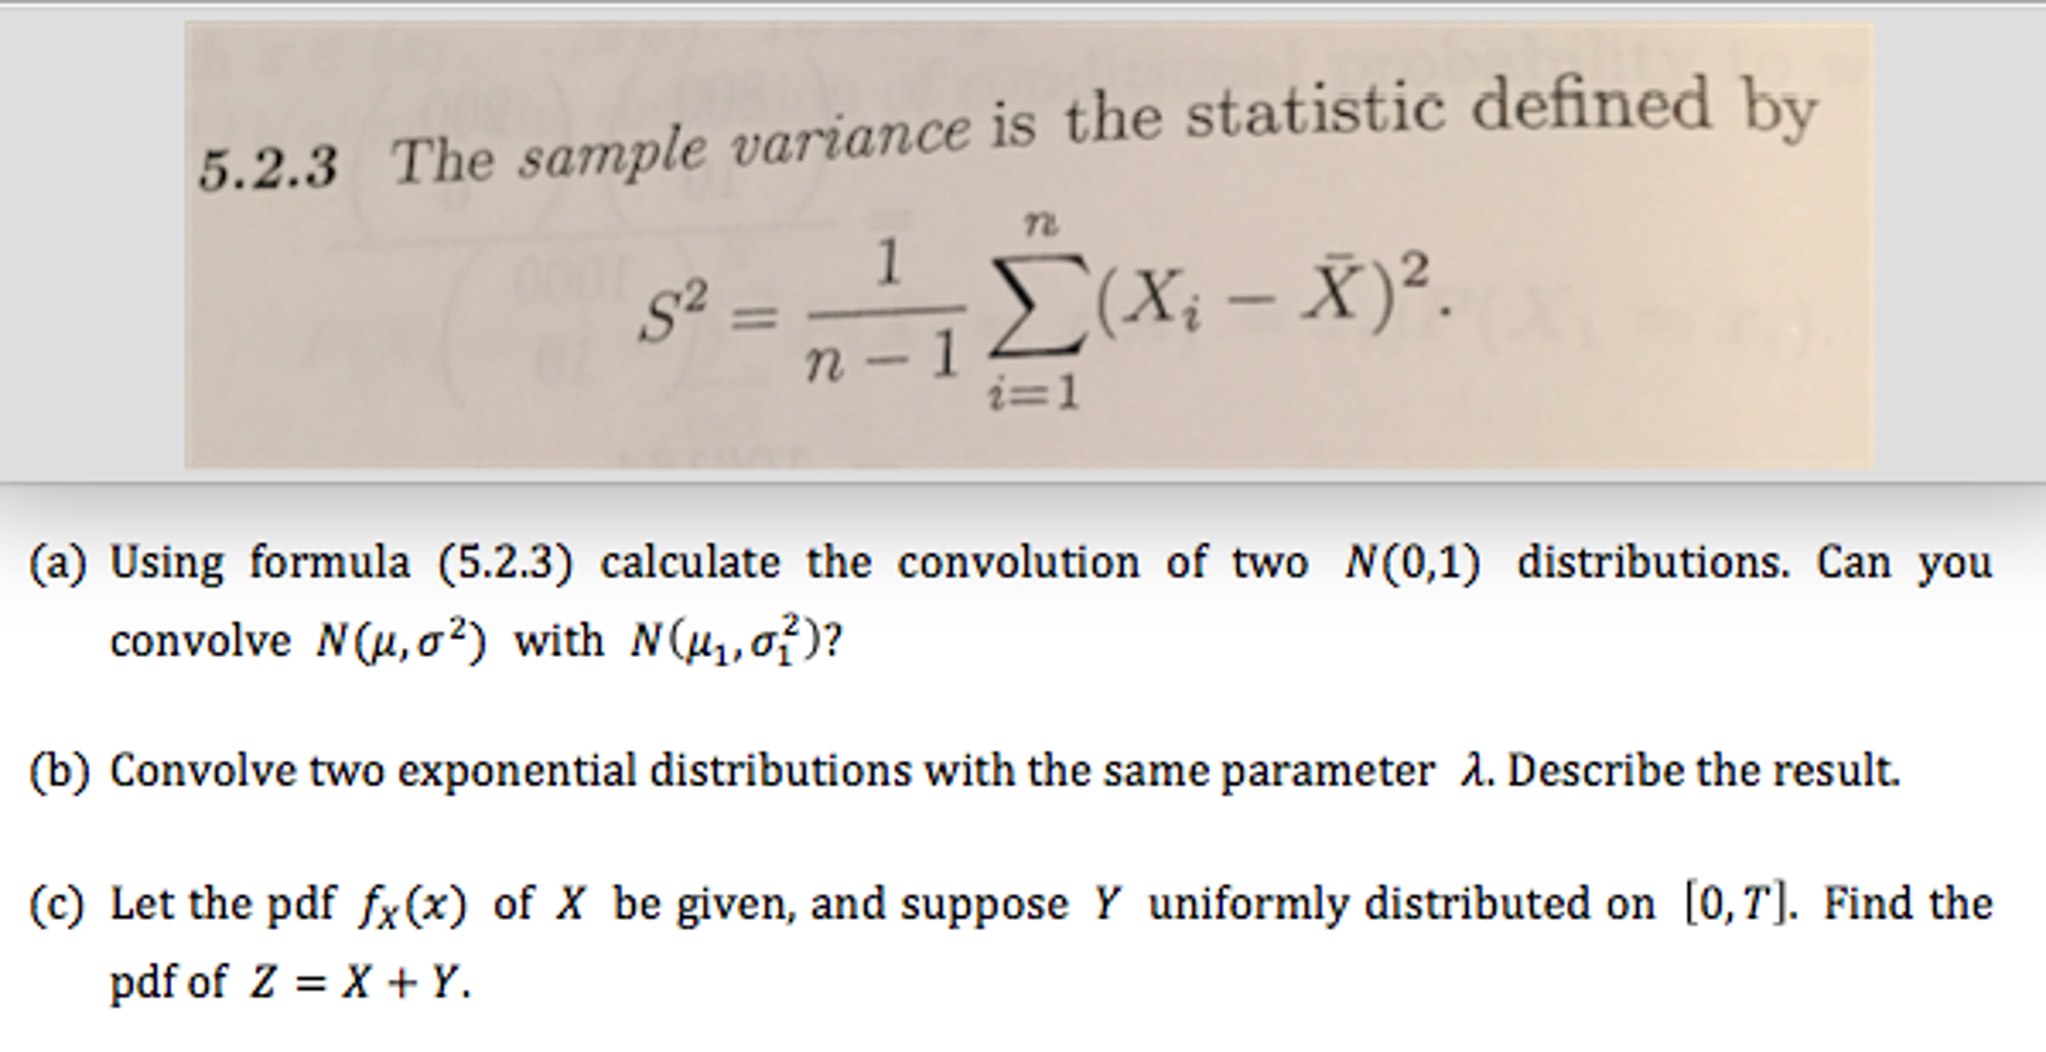 The sample variance is the statistic defined by S^25  Chegg.com